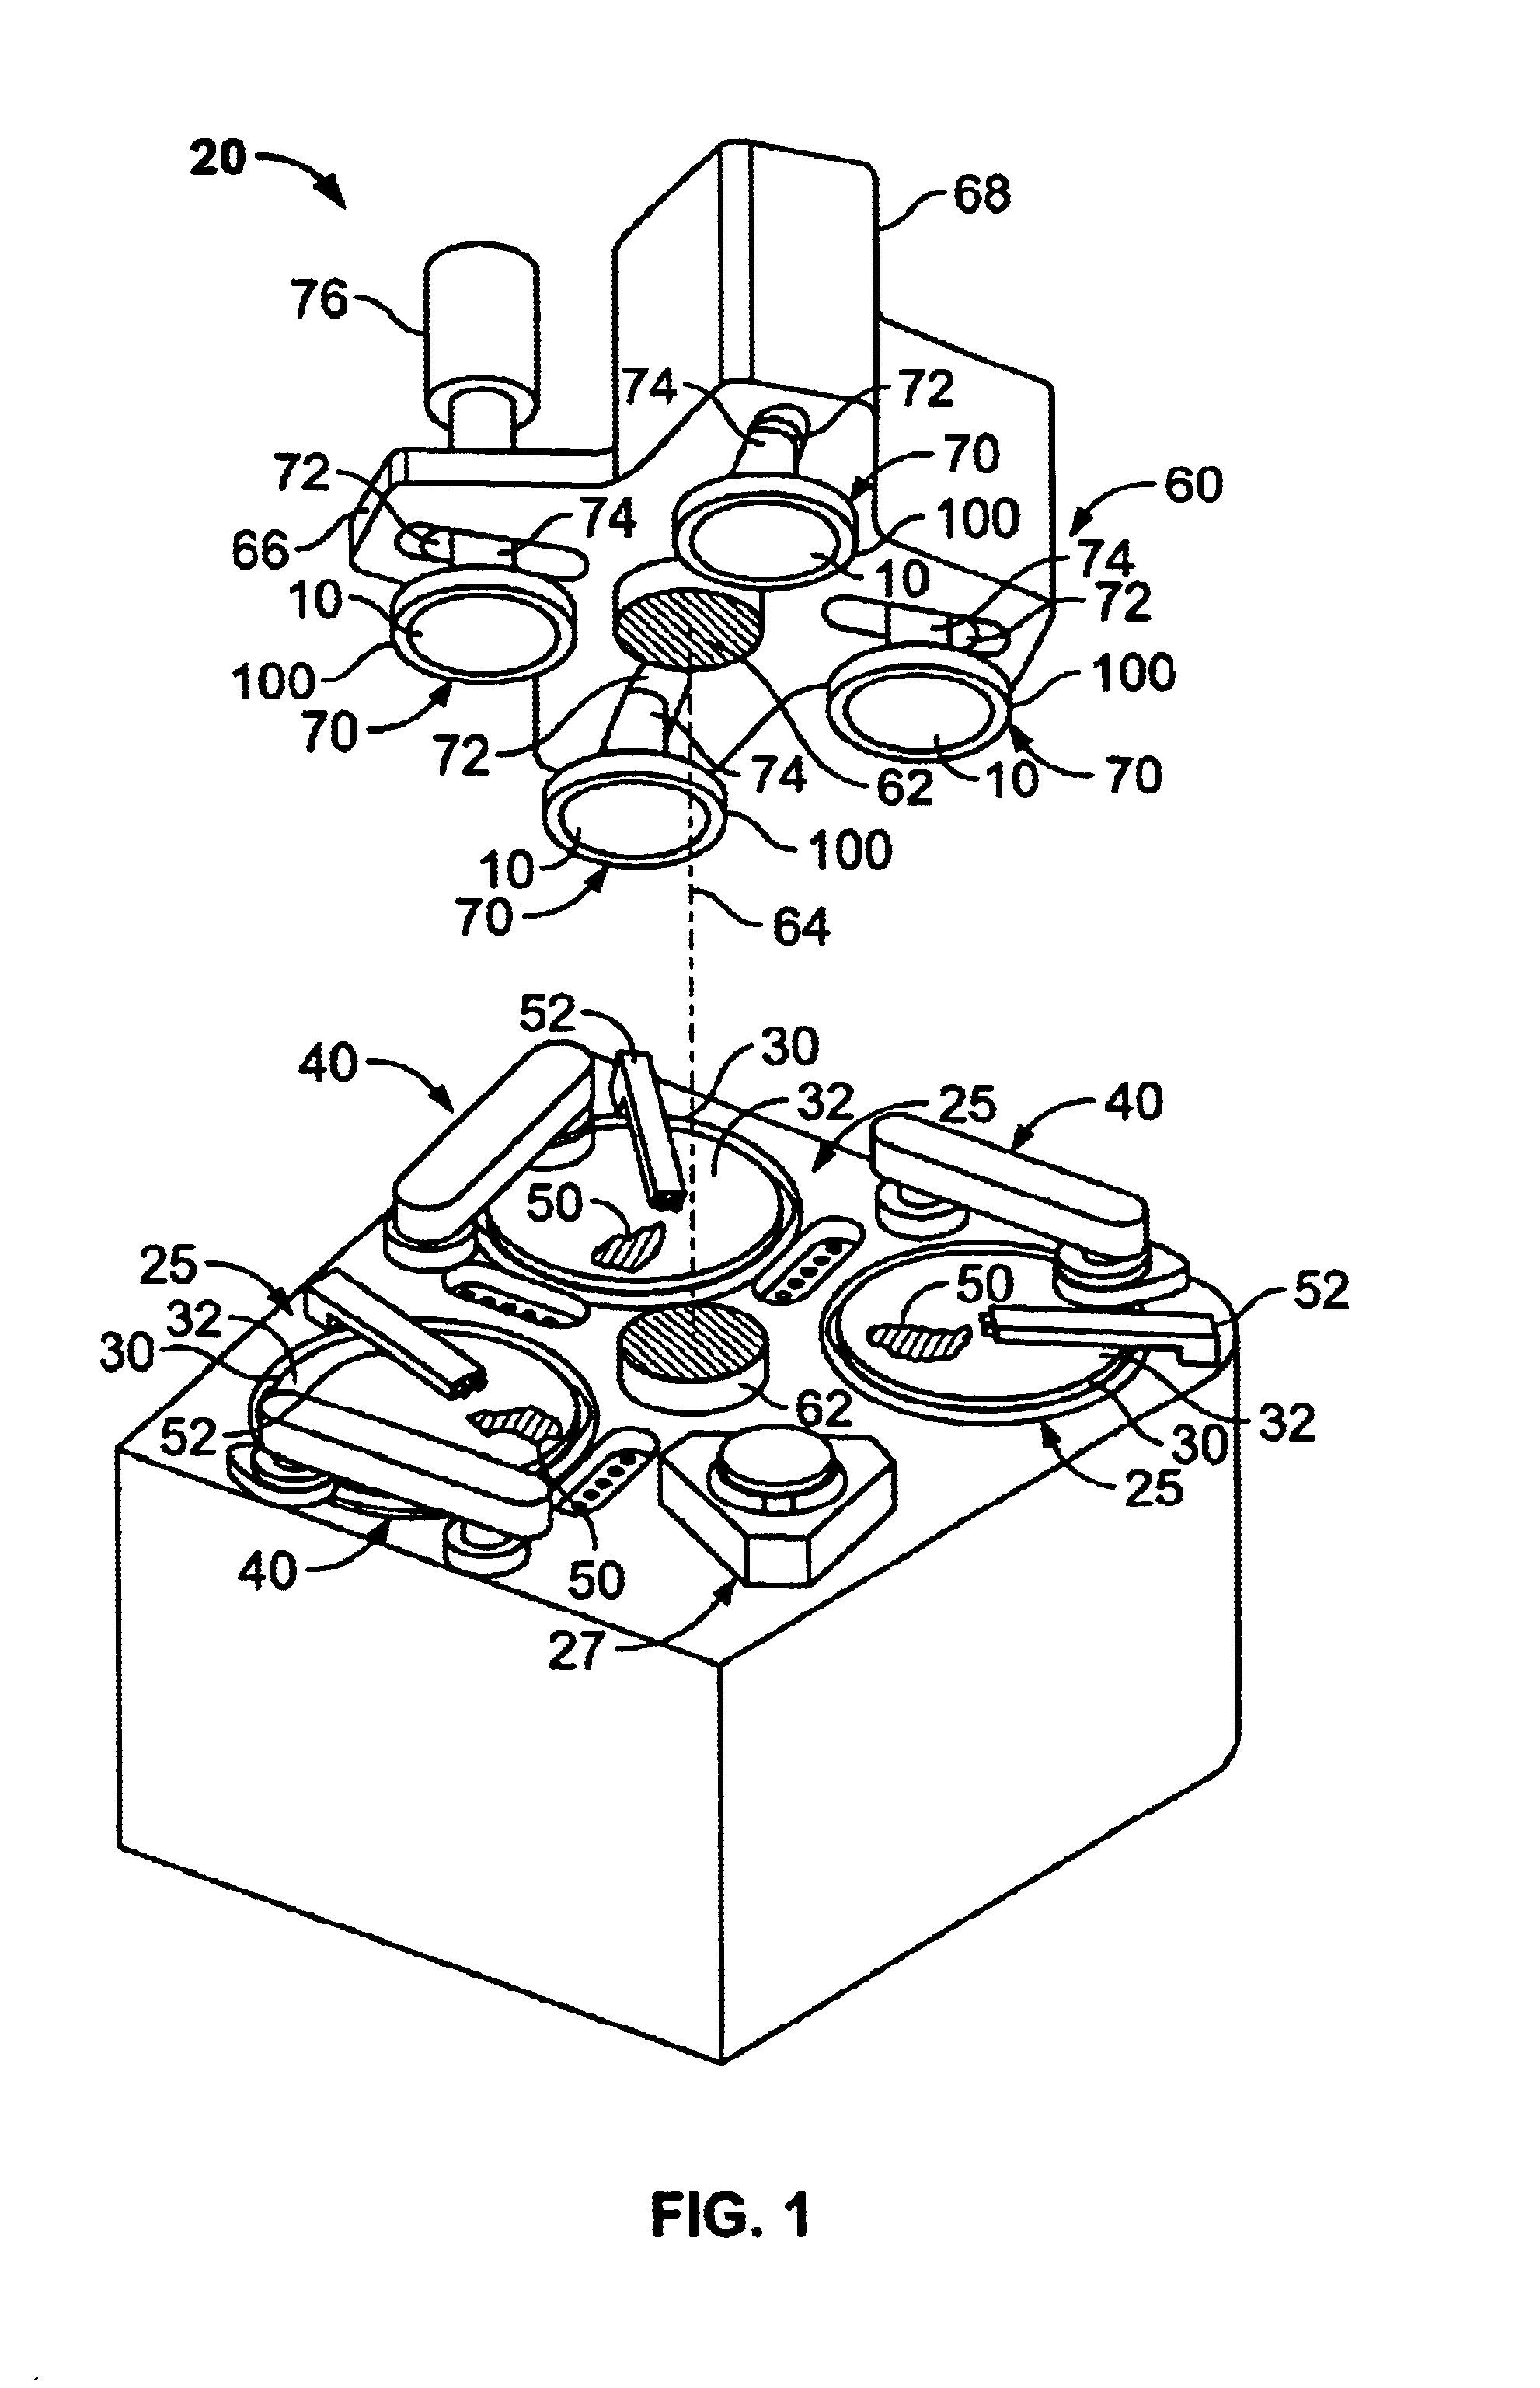 Carrier head with a modified flexible membrane